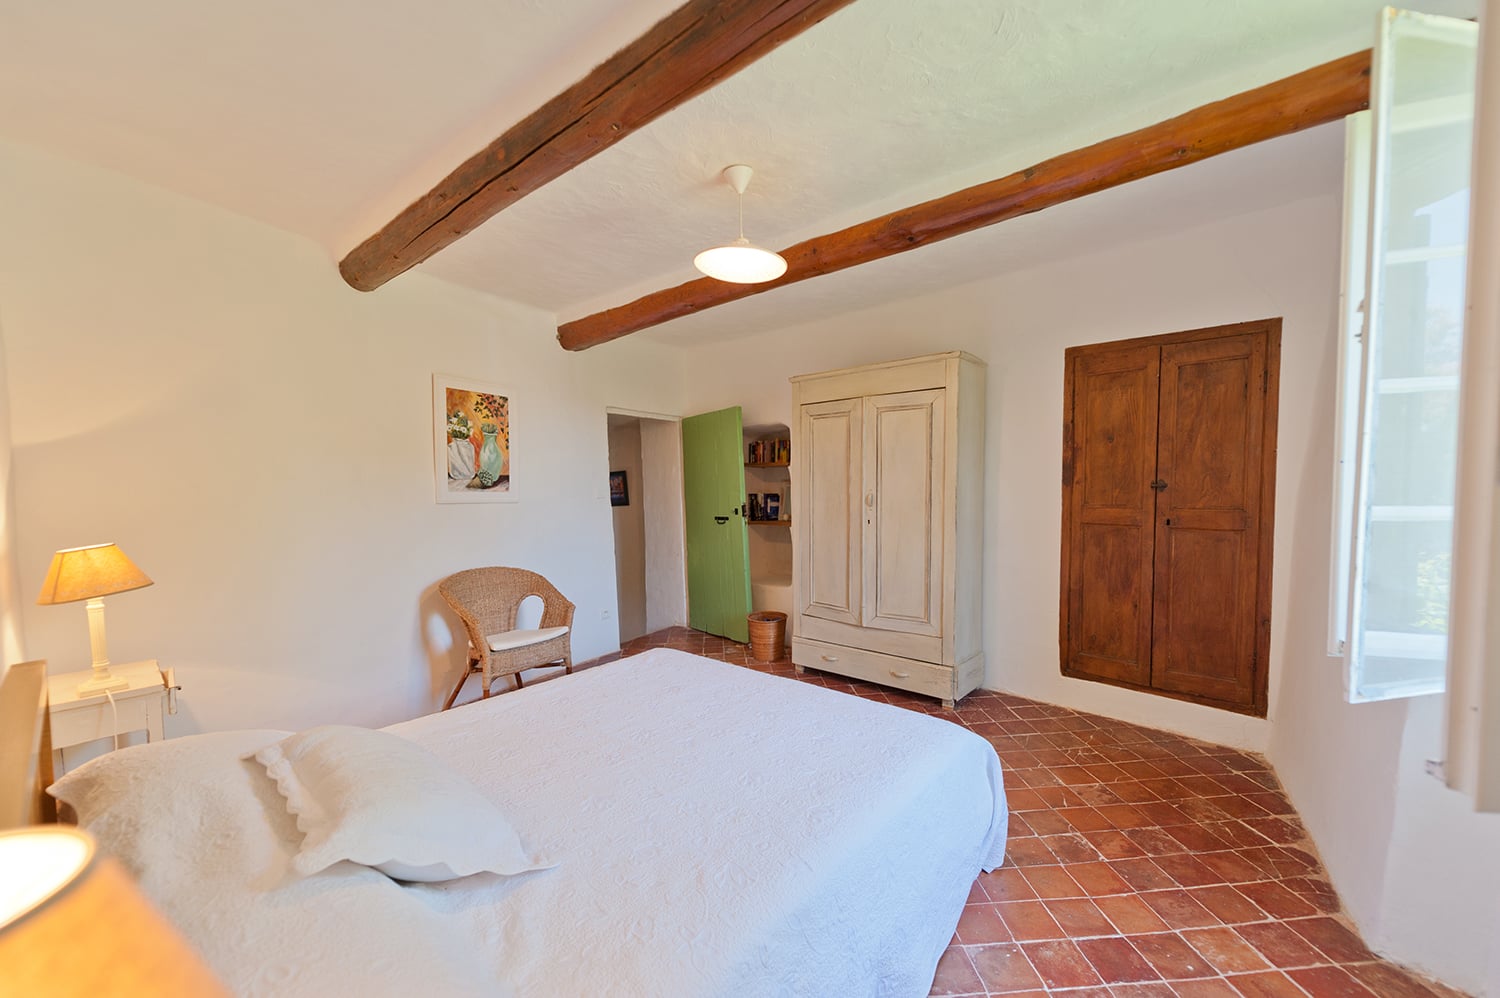 Bedroom | Self catering home in Provence